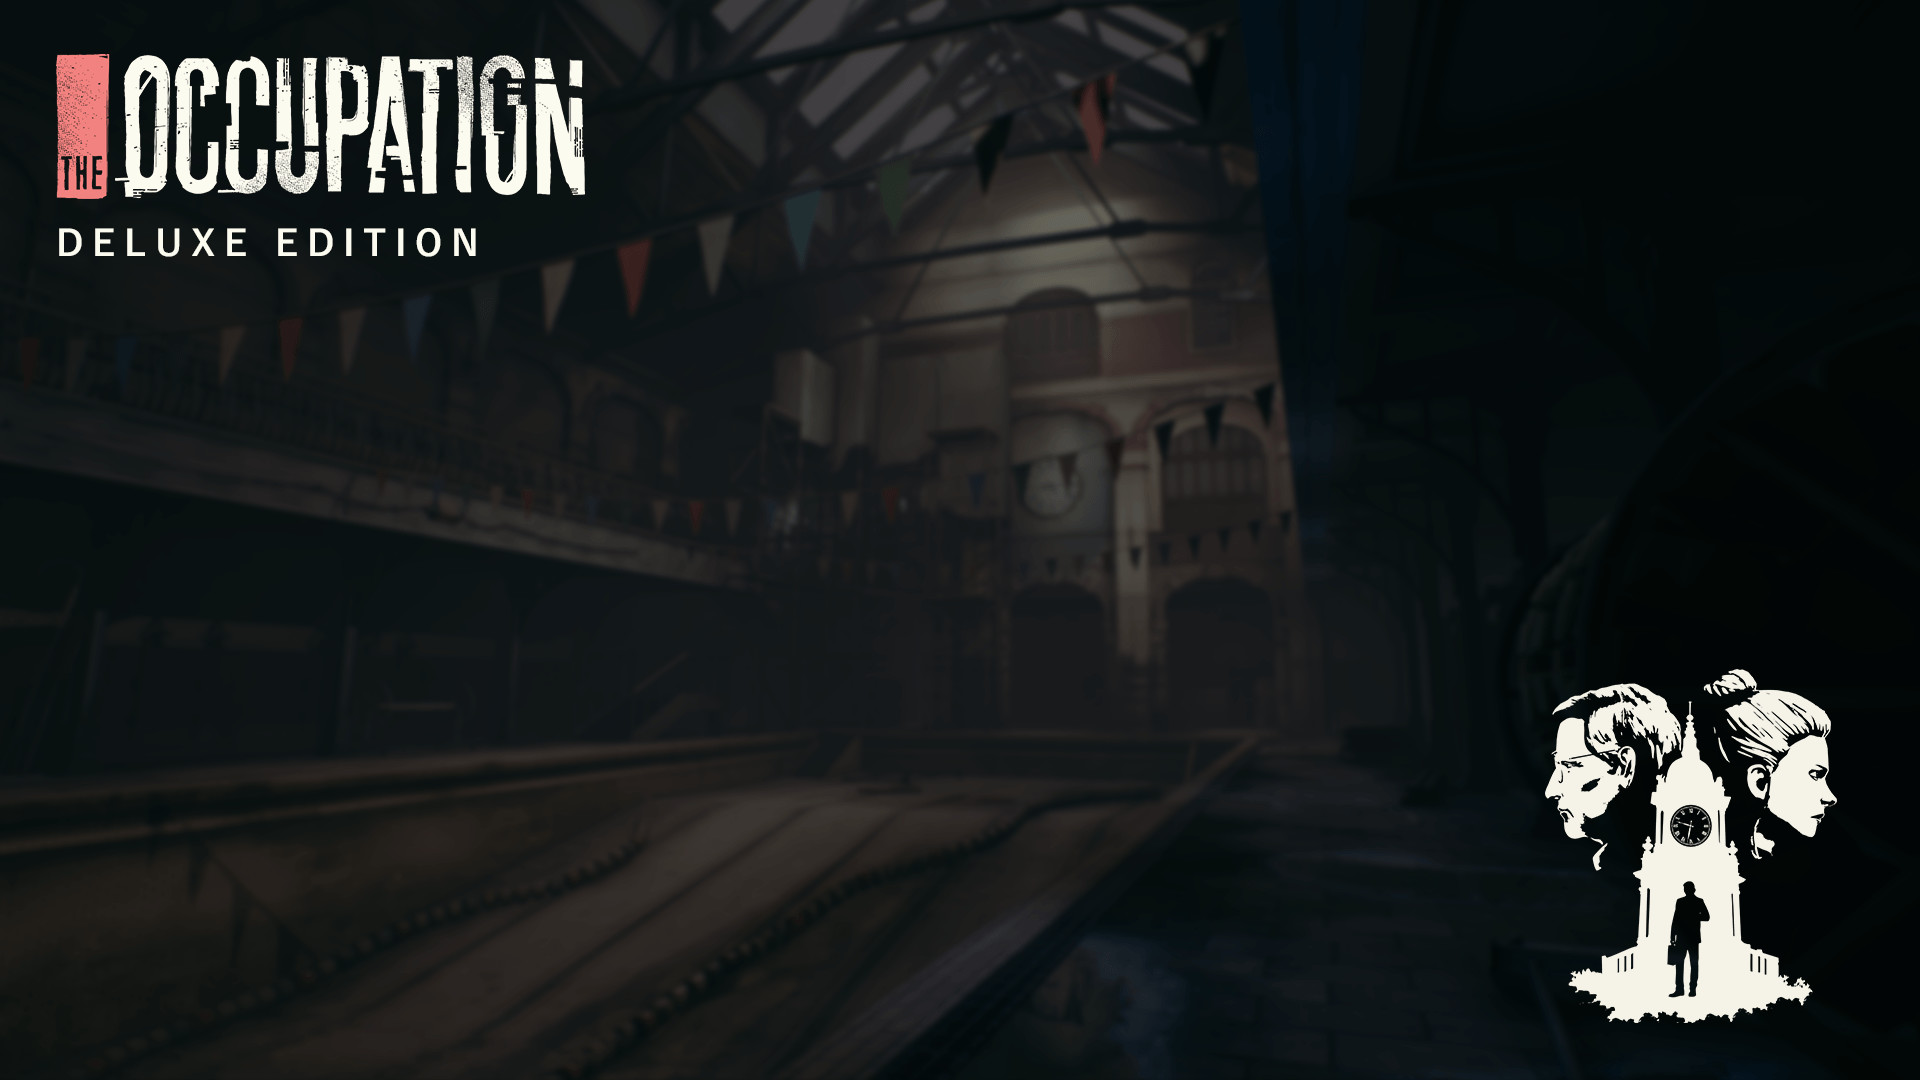 The Occupation: Deluxe Edition Upgrade Featured Screenshot #1